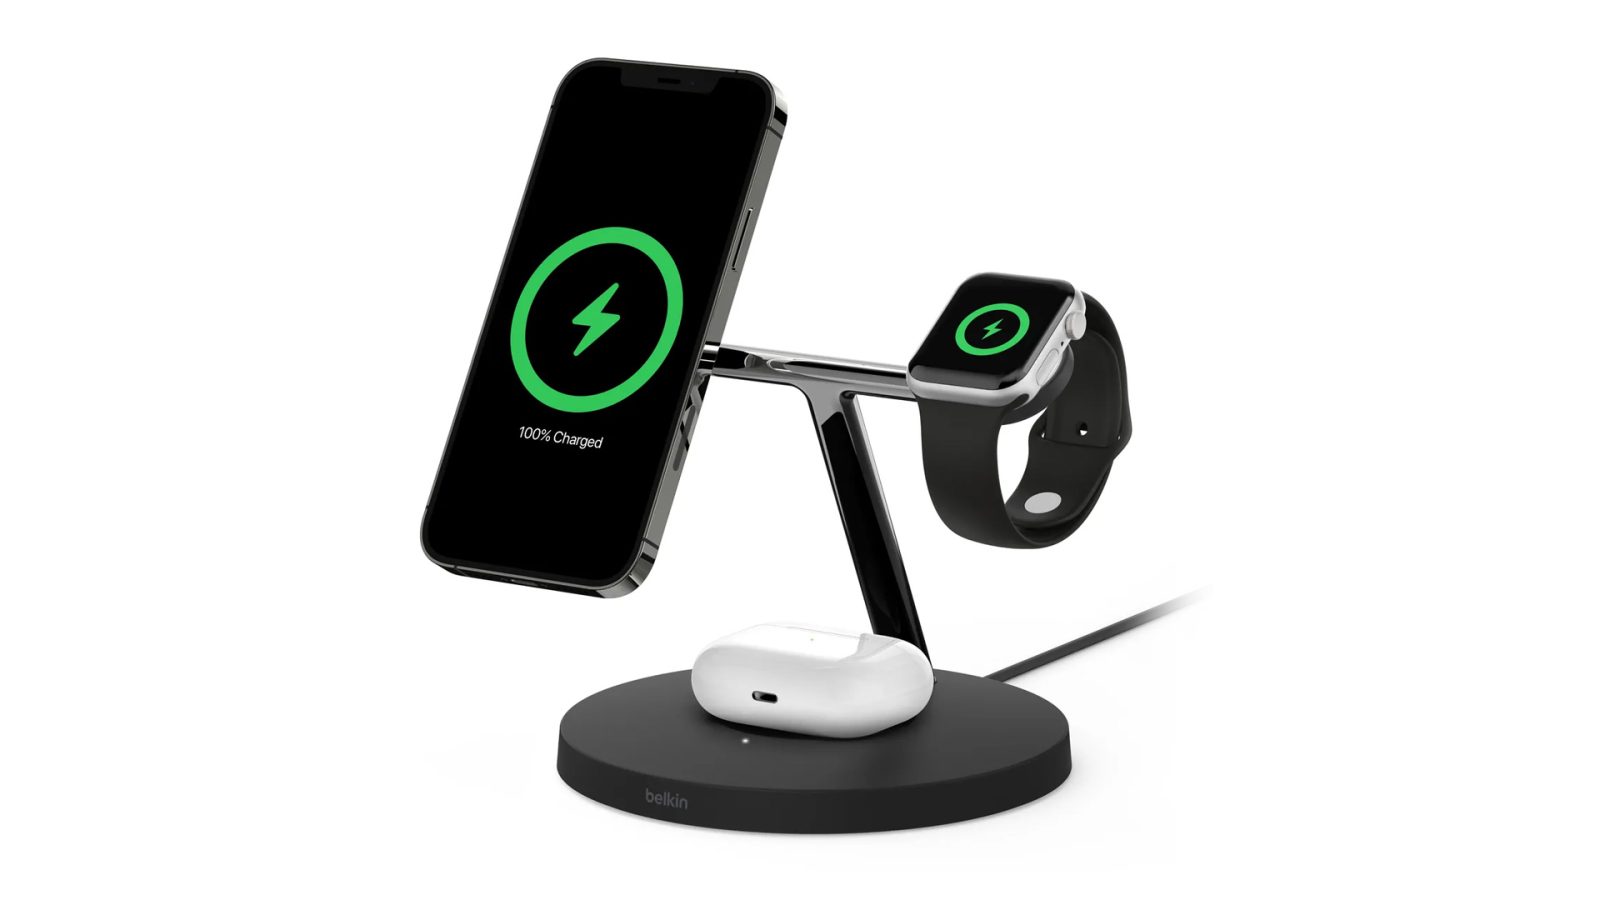 Belkin launches new 3-in-1 stand that fast charges Apple Watch - 9to5Mac